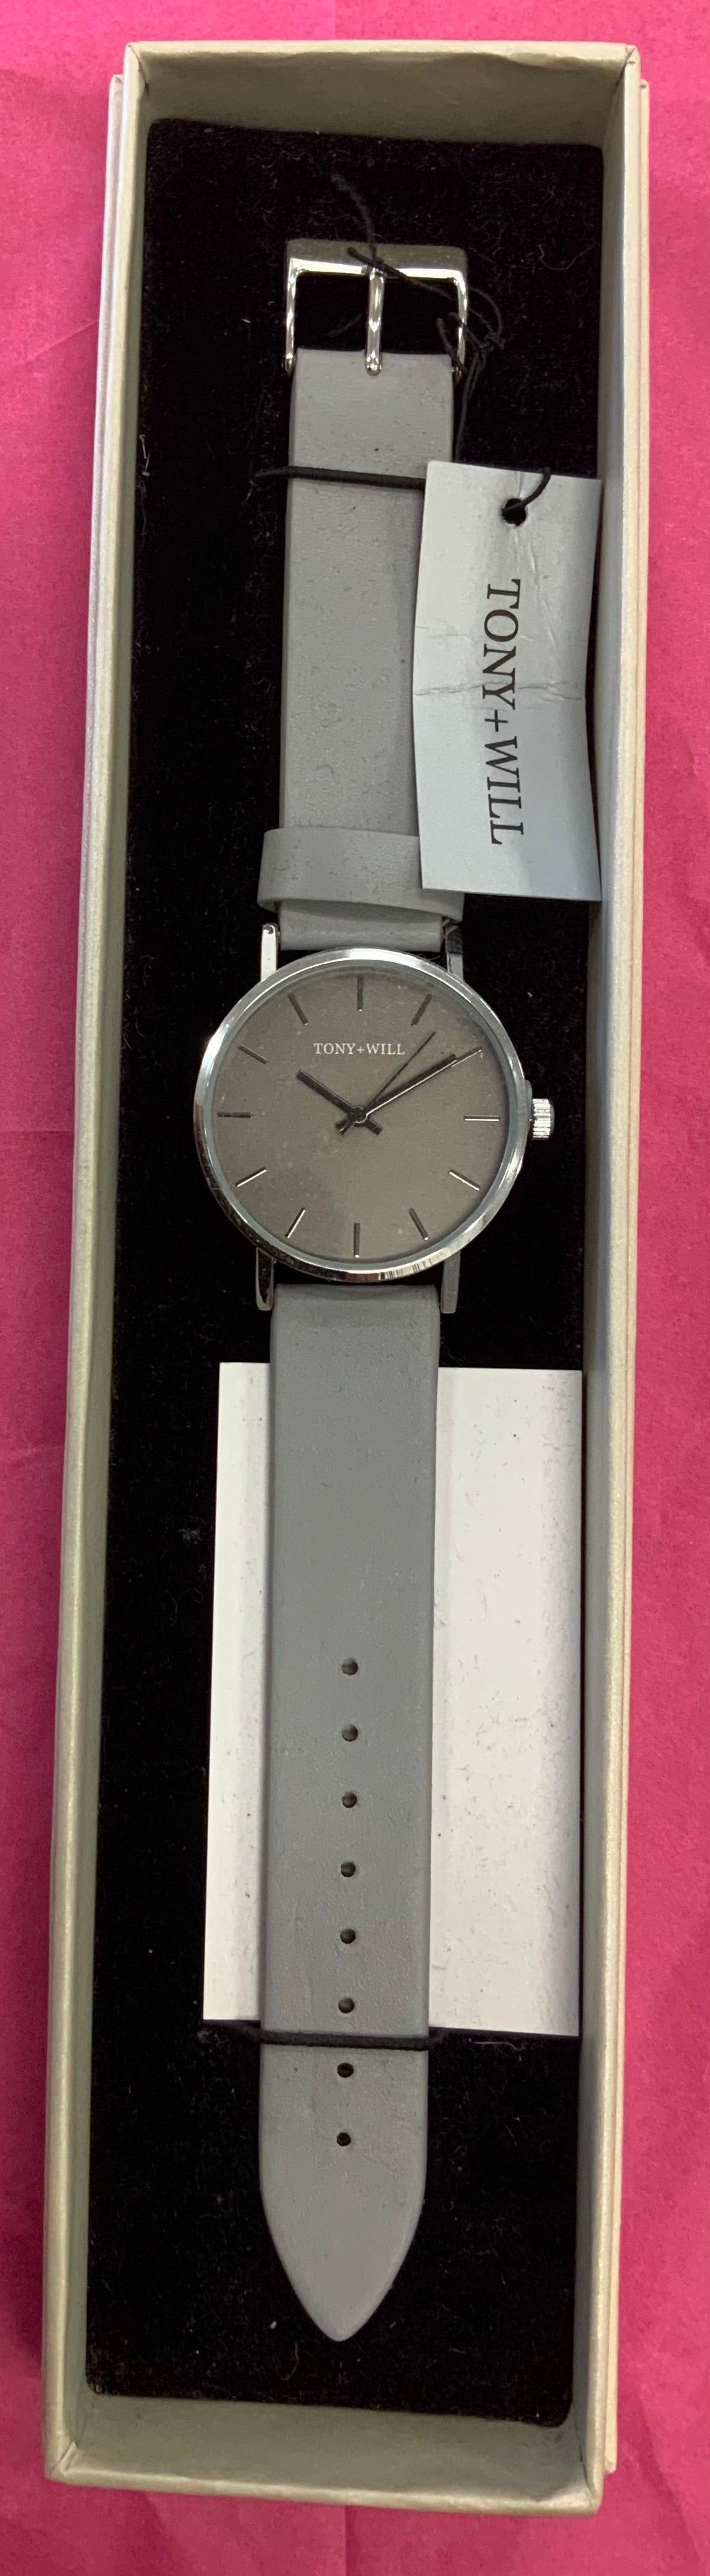 Tony and will - Grey leather watch